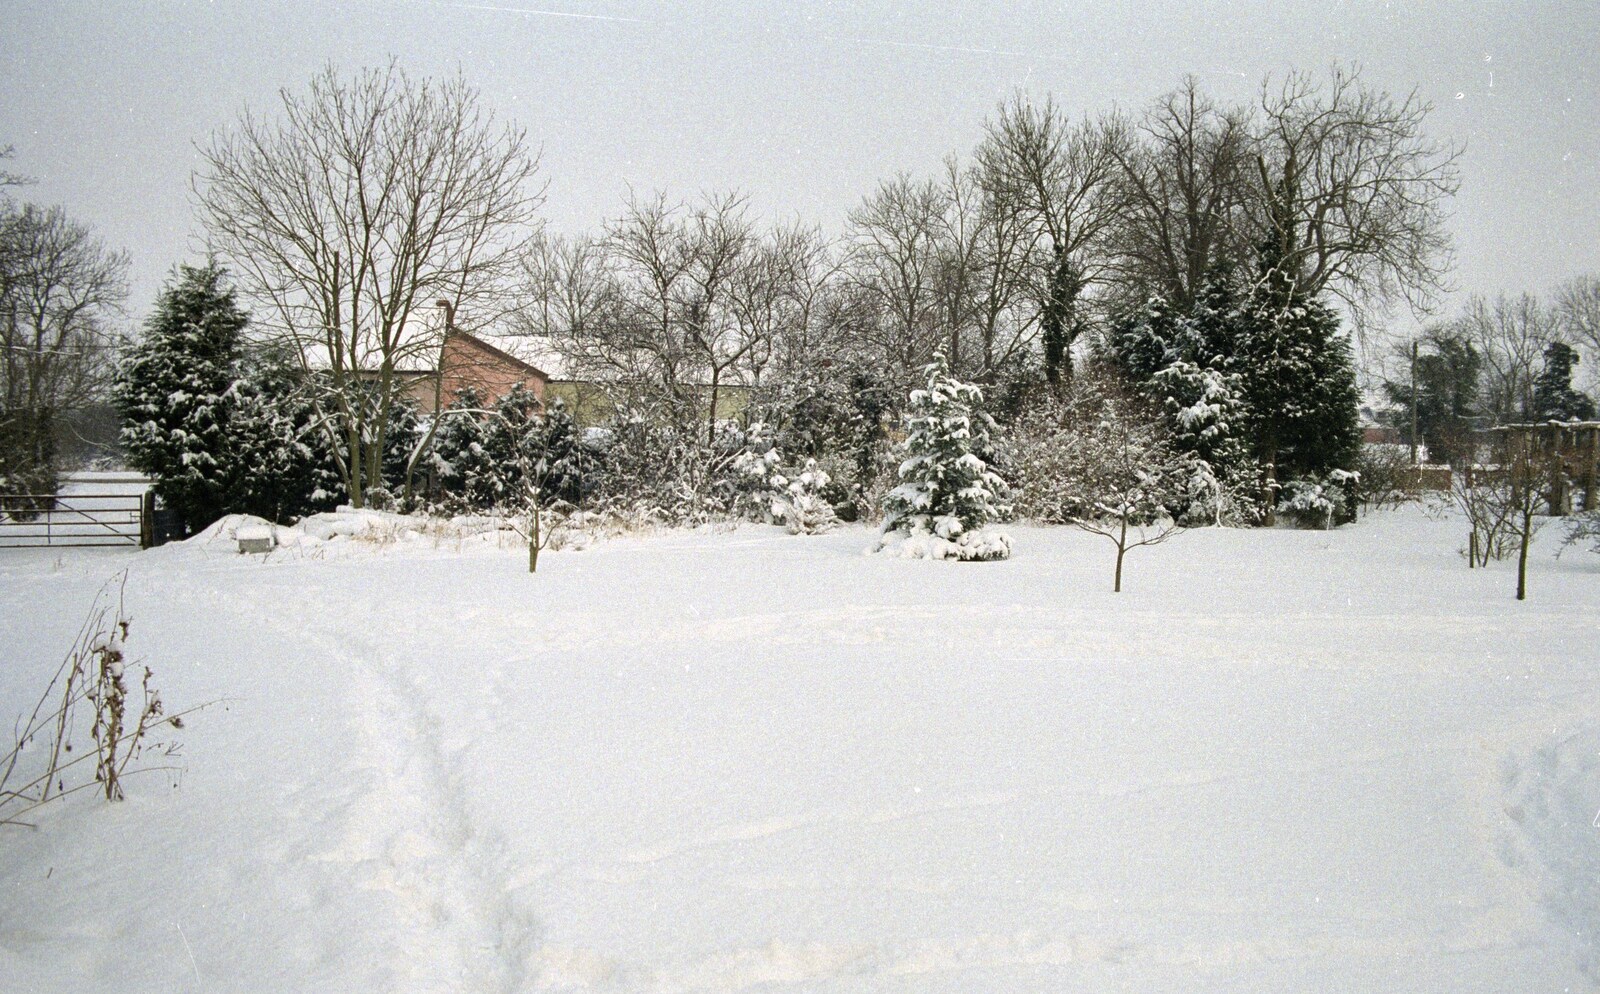 A view of The Stables from the garages from Snow Days, Stuston and Norwich, Suffolk and Norfolk - 4th February 1991